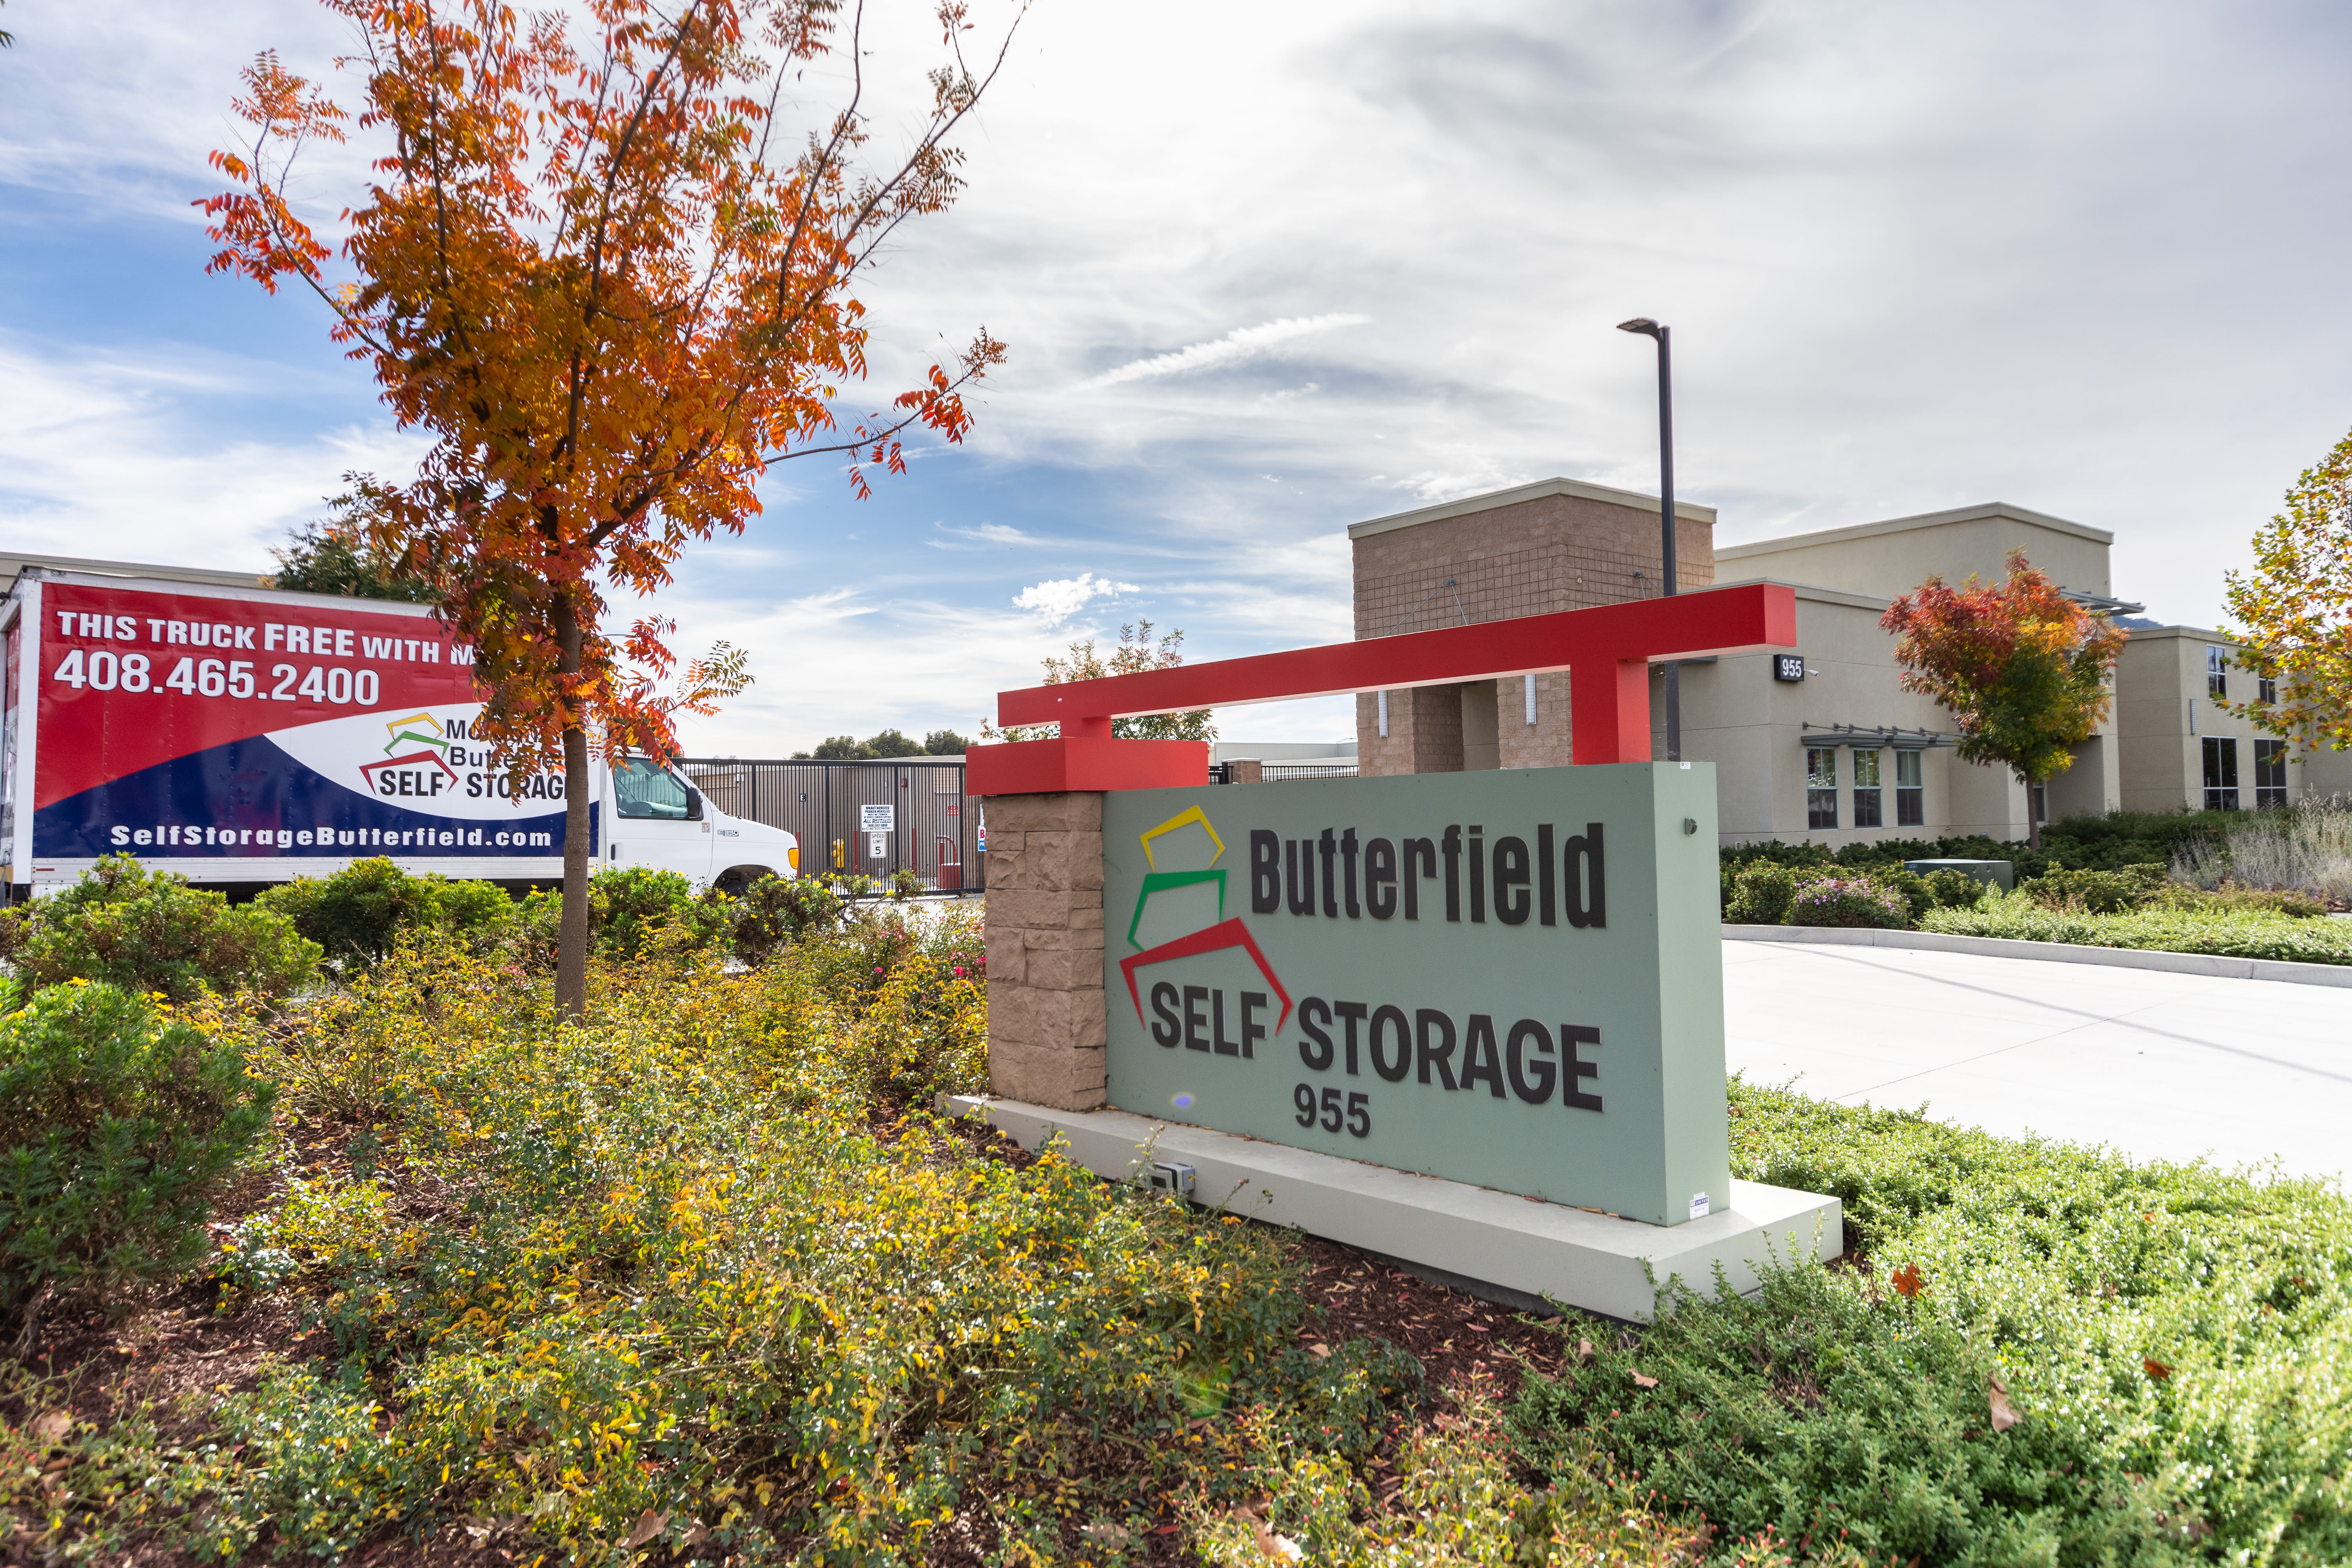 Map & Directions to Butterfield Self Storage in Morgan Hill, California